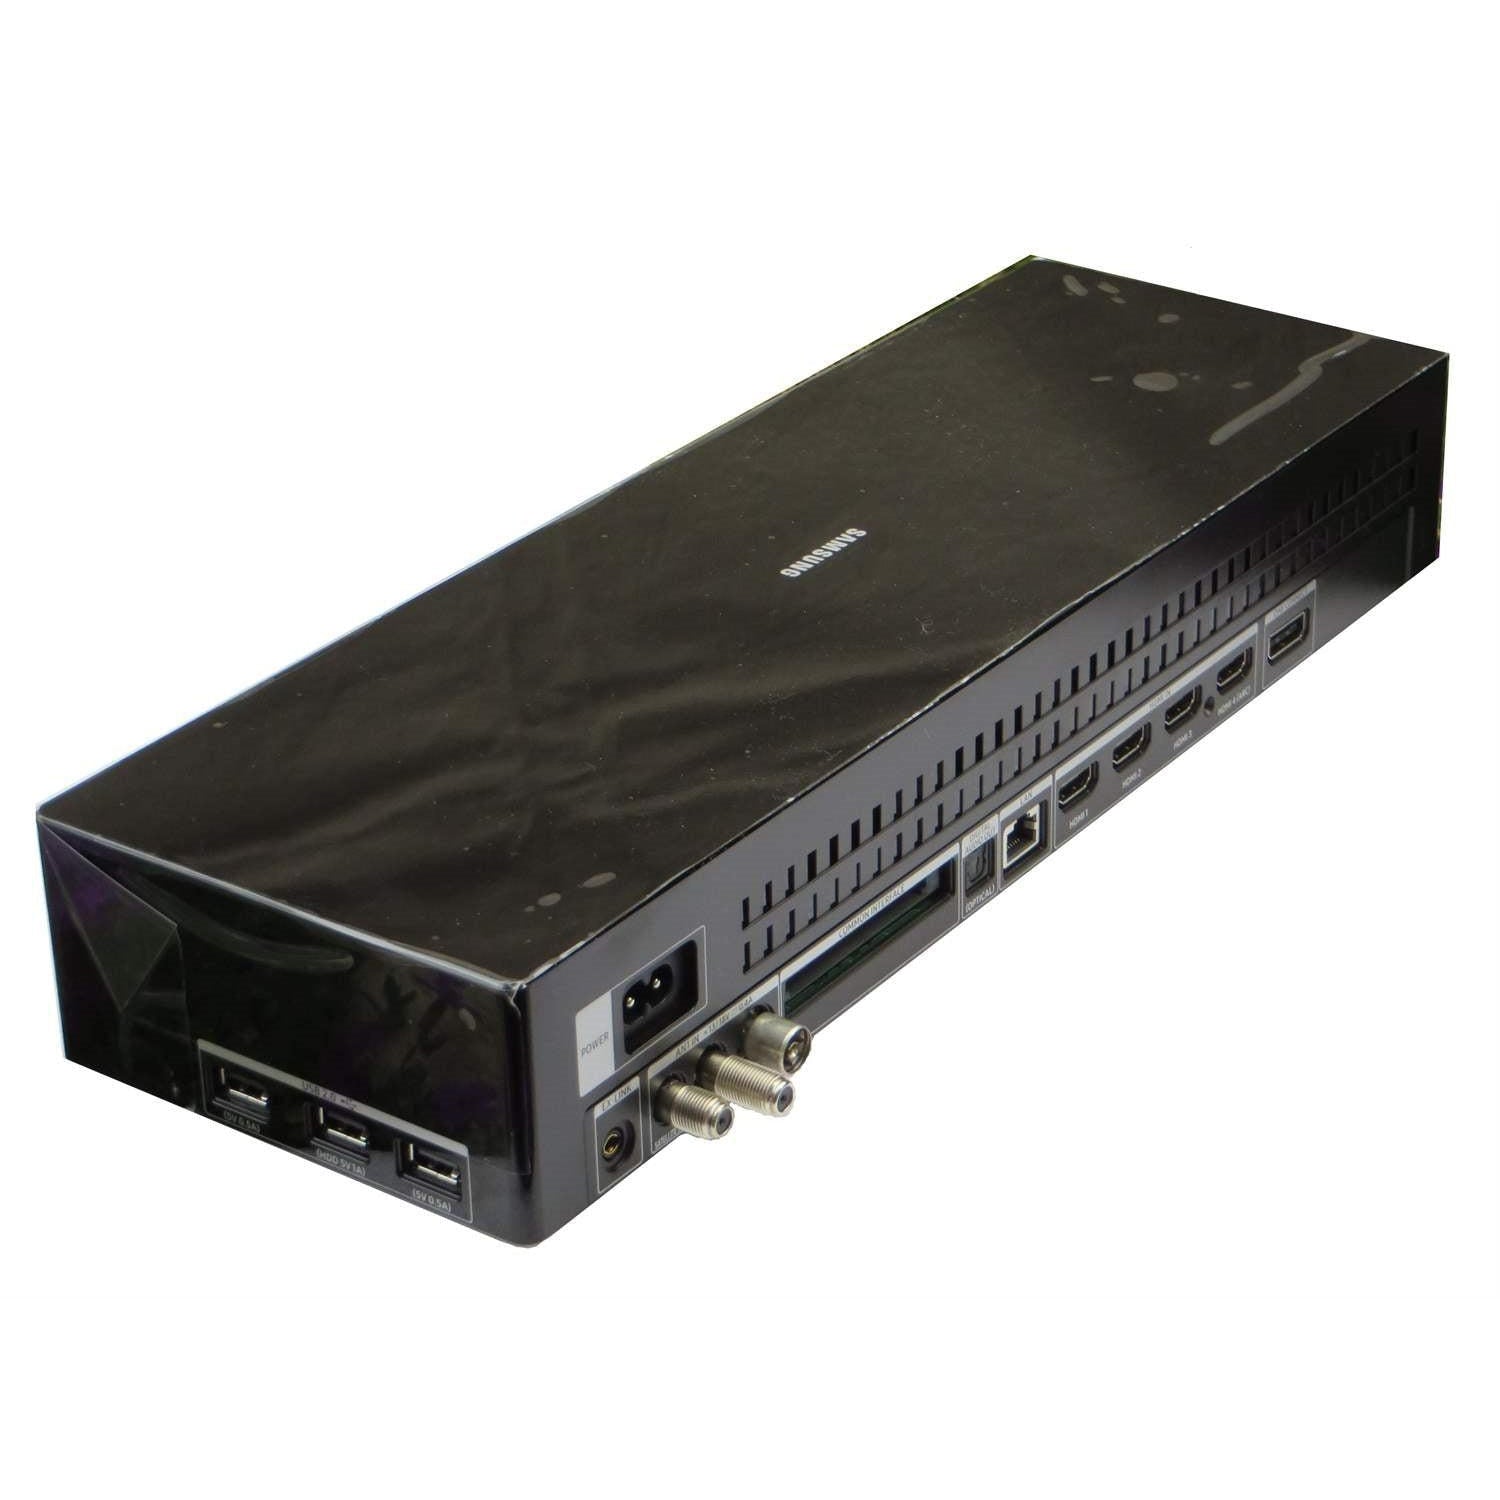 Samsung One Connect Box - Various Models Available - Unit Only